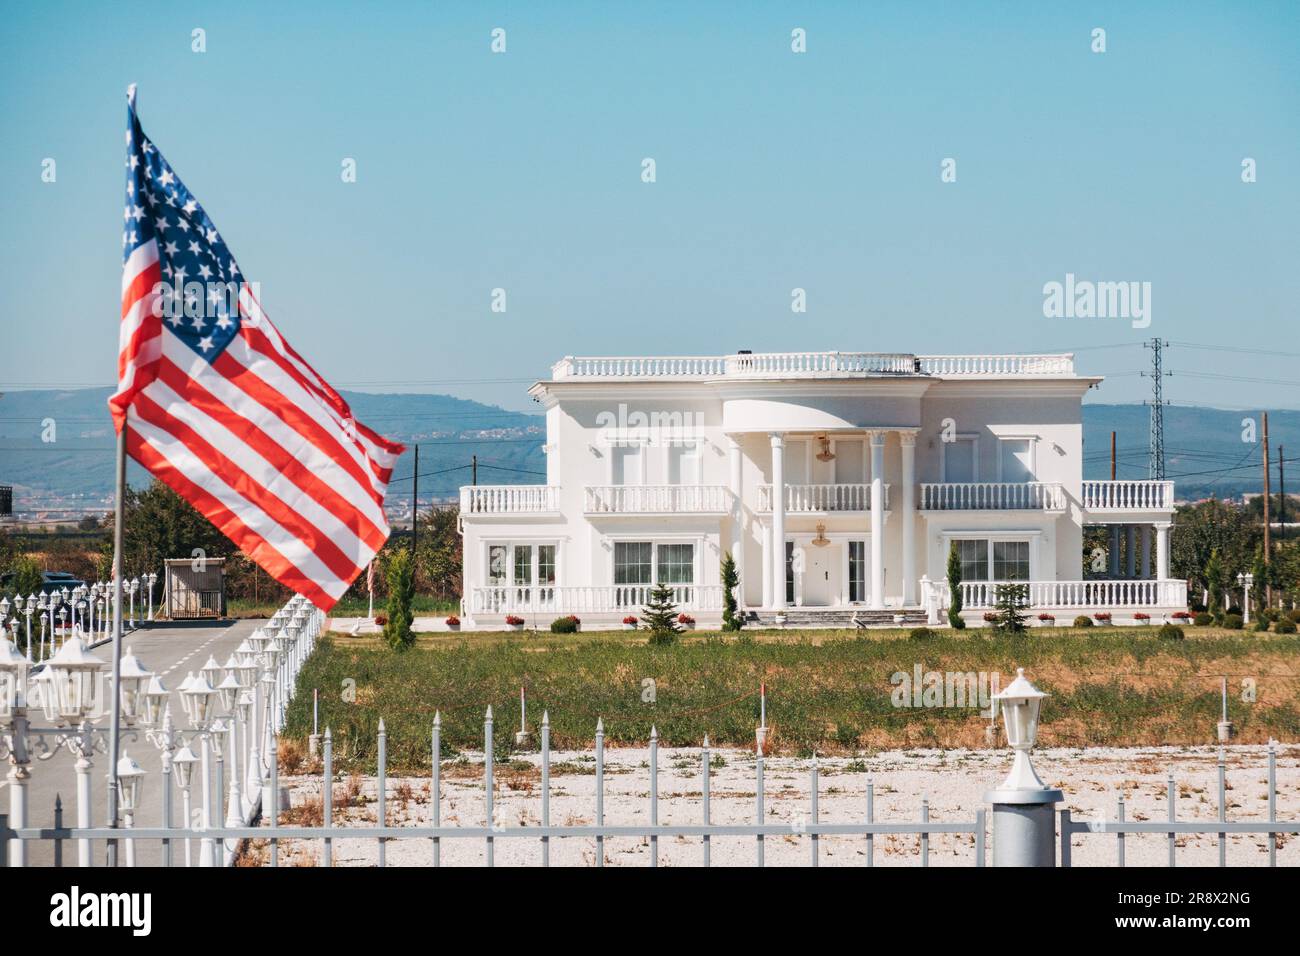 an imitation White House constructed in Llugaxhi, a rural town in Kosovo/ An American flag rests on the gate Stock Photo